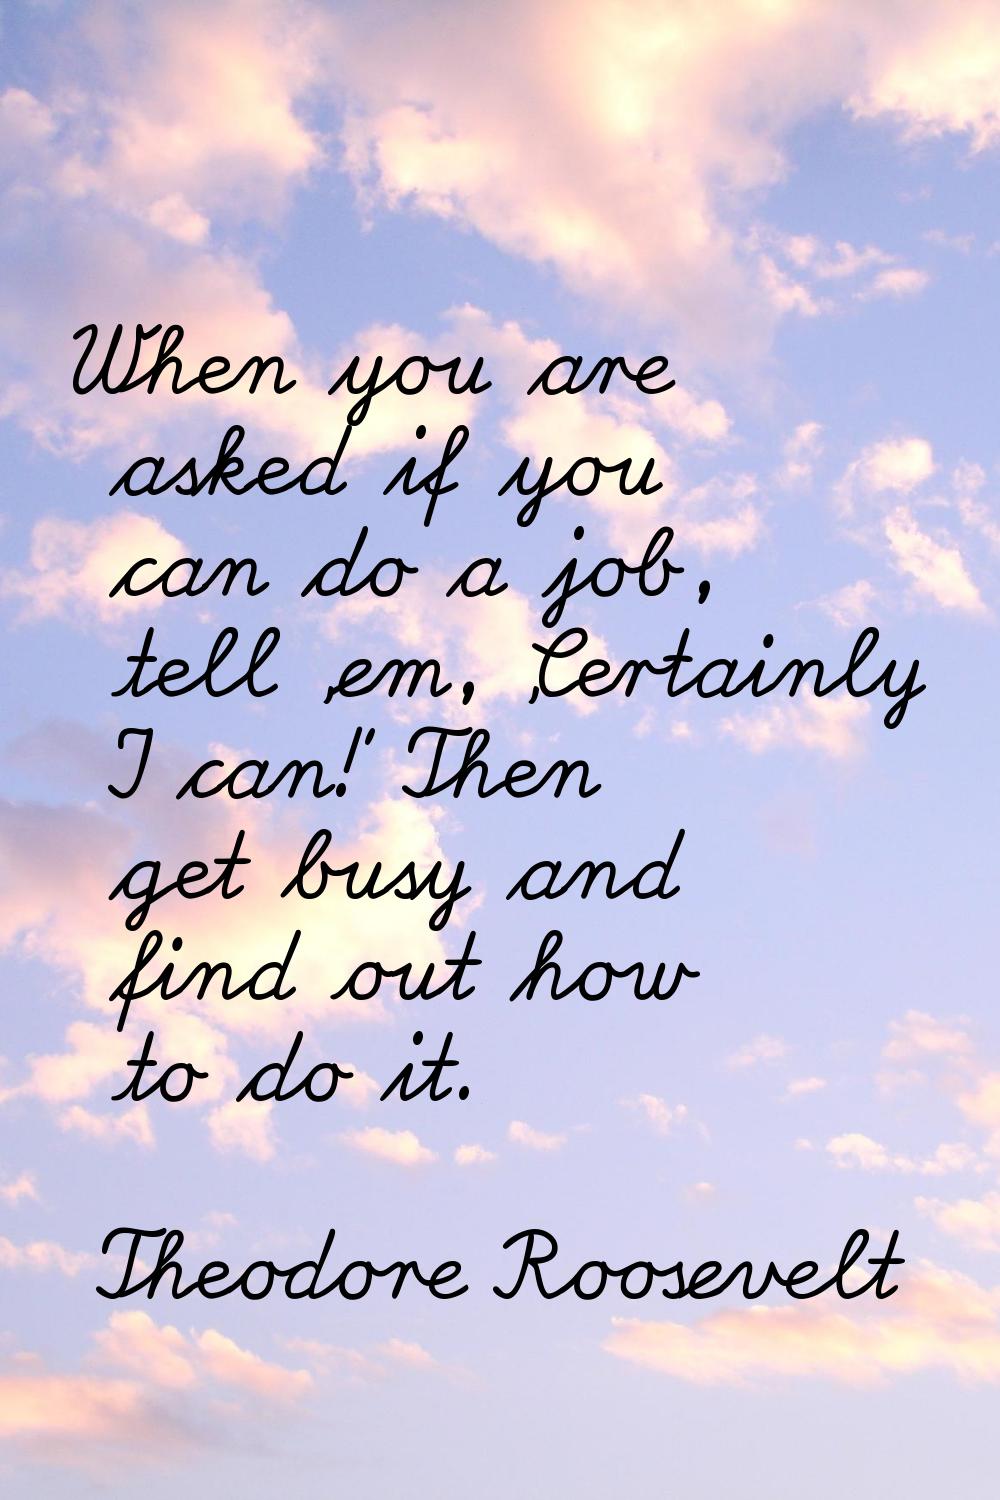 When you are asked if you can do a job, tell 'em, 'Certainly I can!' Then get busy and find out how